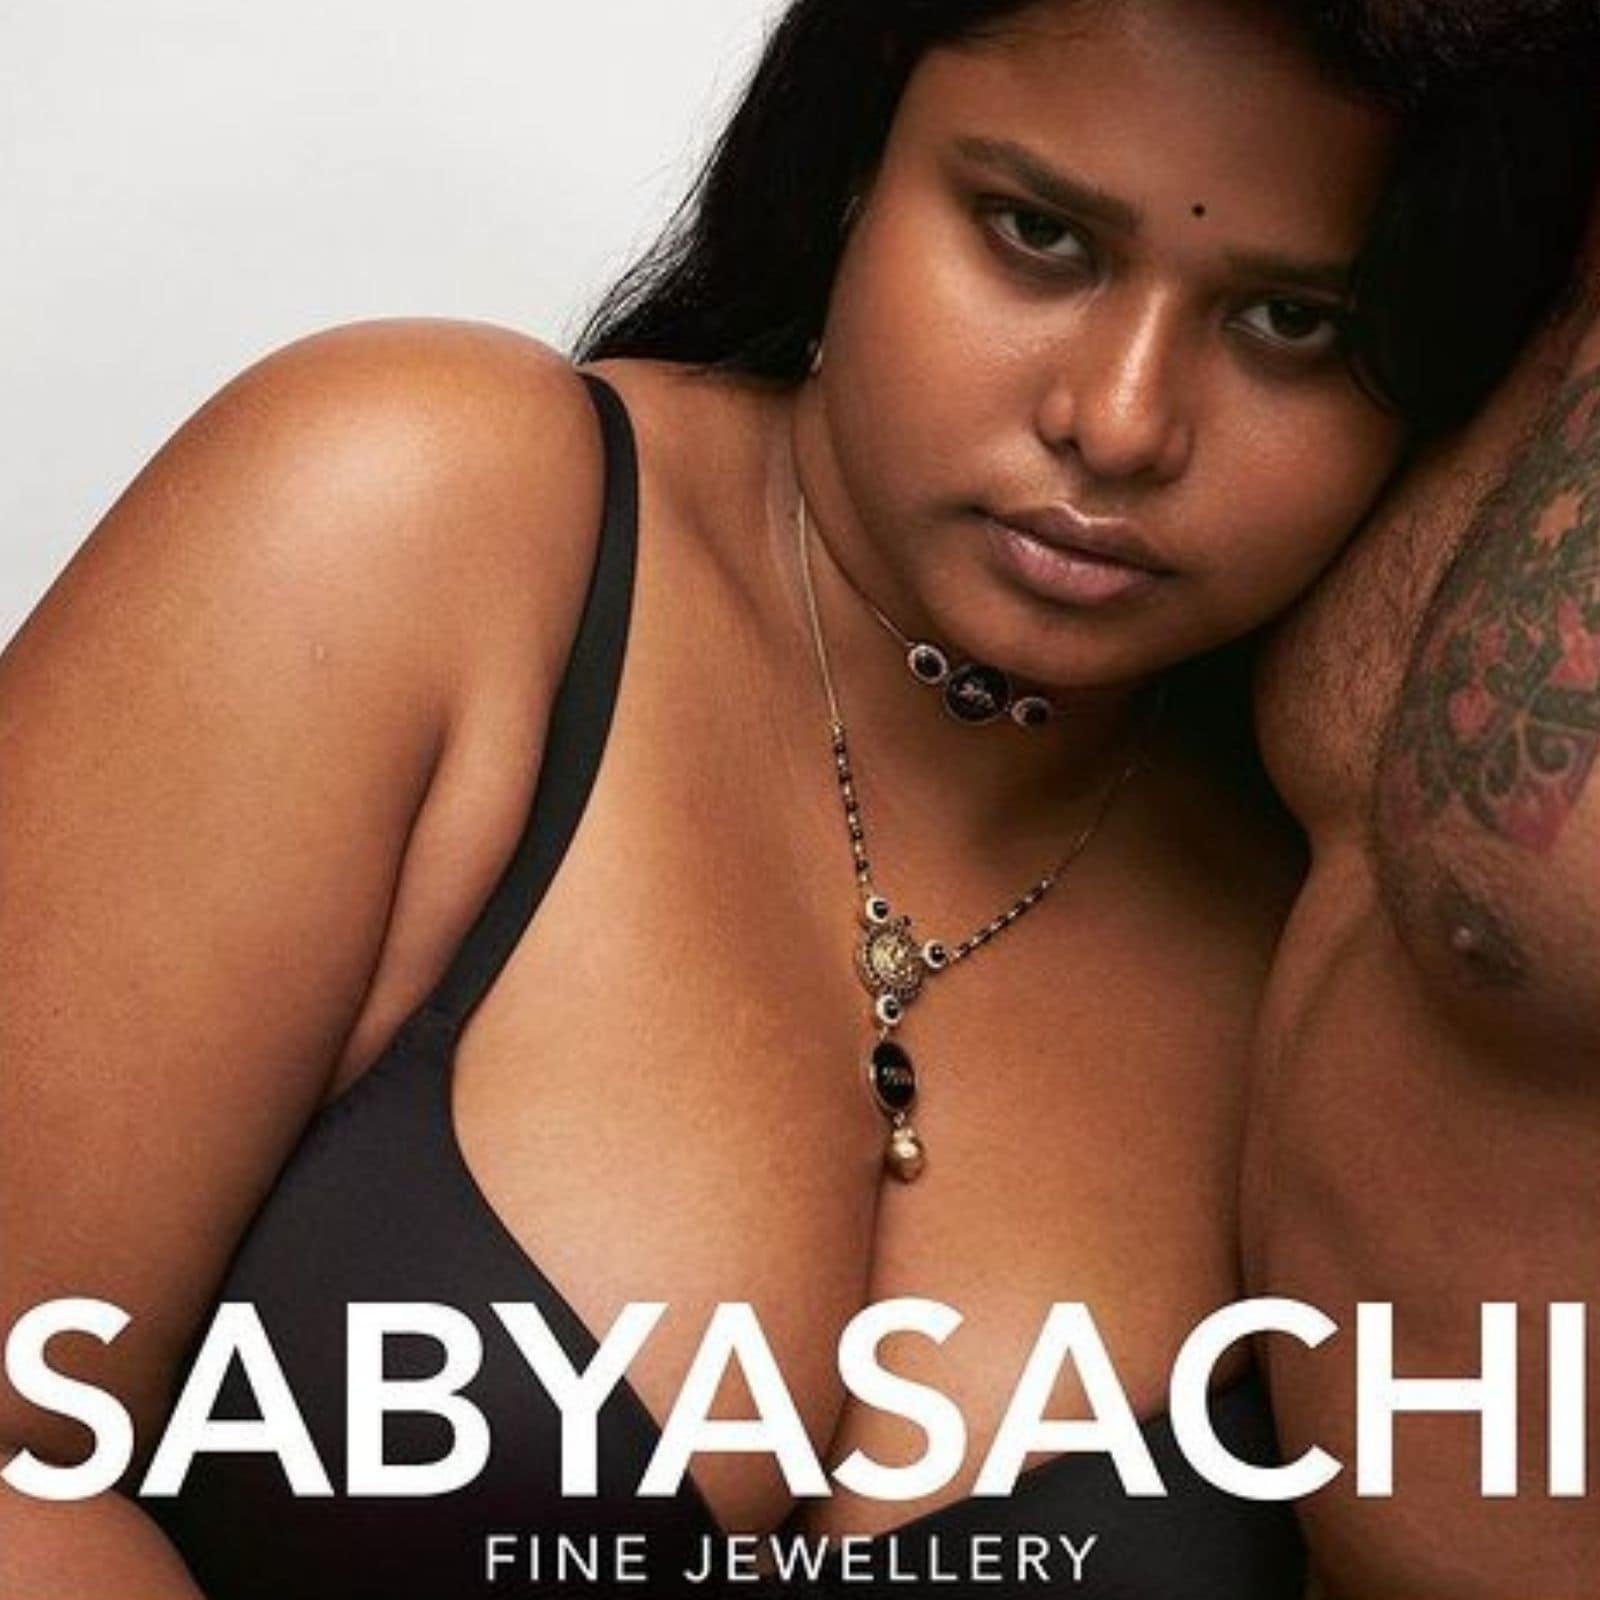 Sabyasachi's New Campaign Faces Flak For Featuring Mangalsutra as 'Fashion  Jewellery'